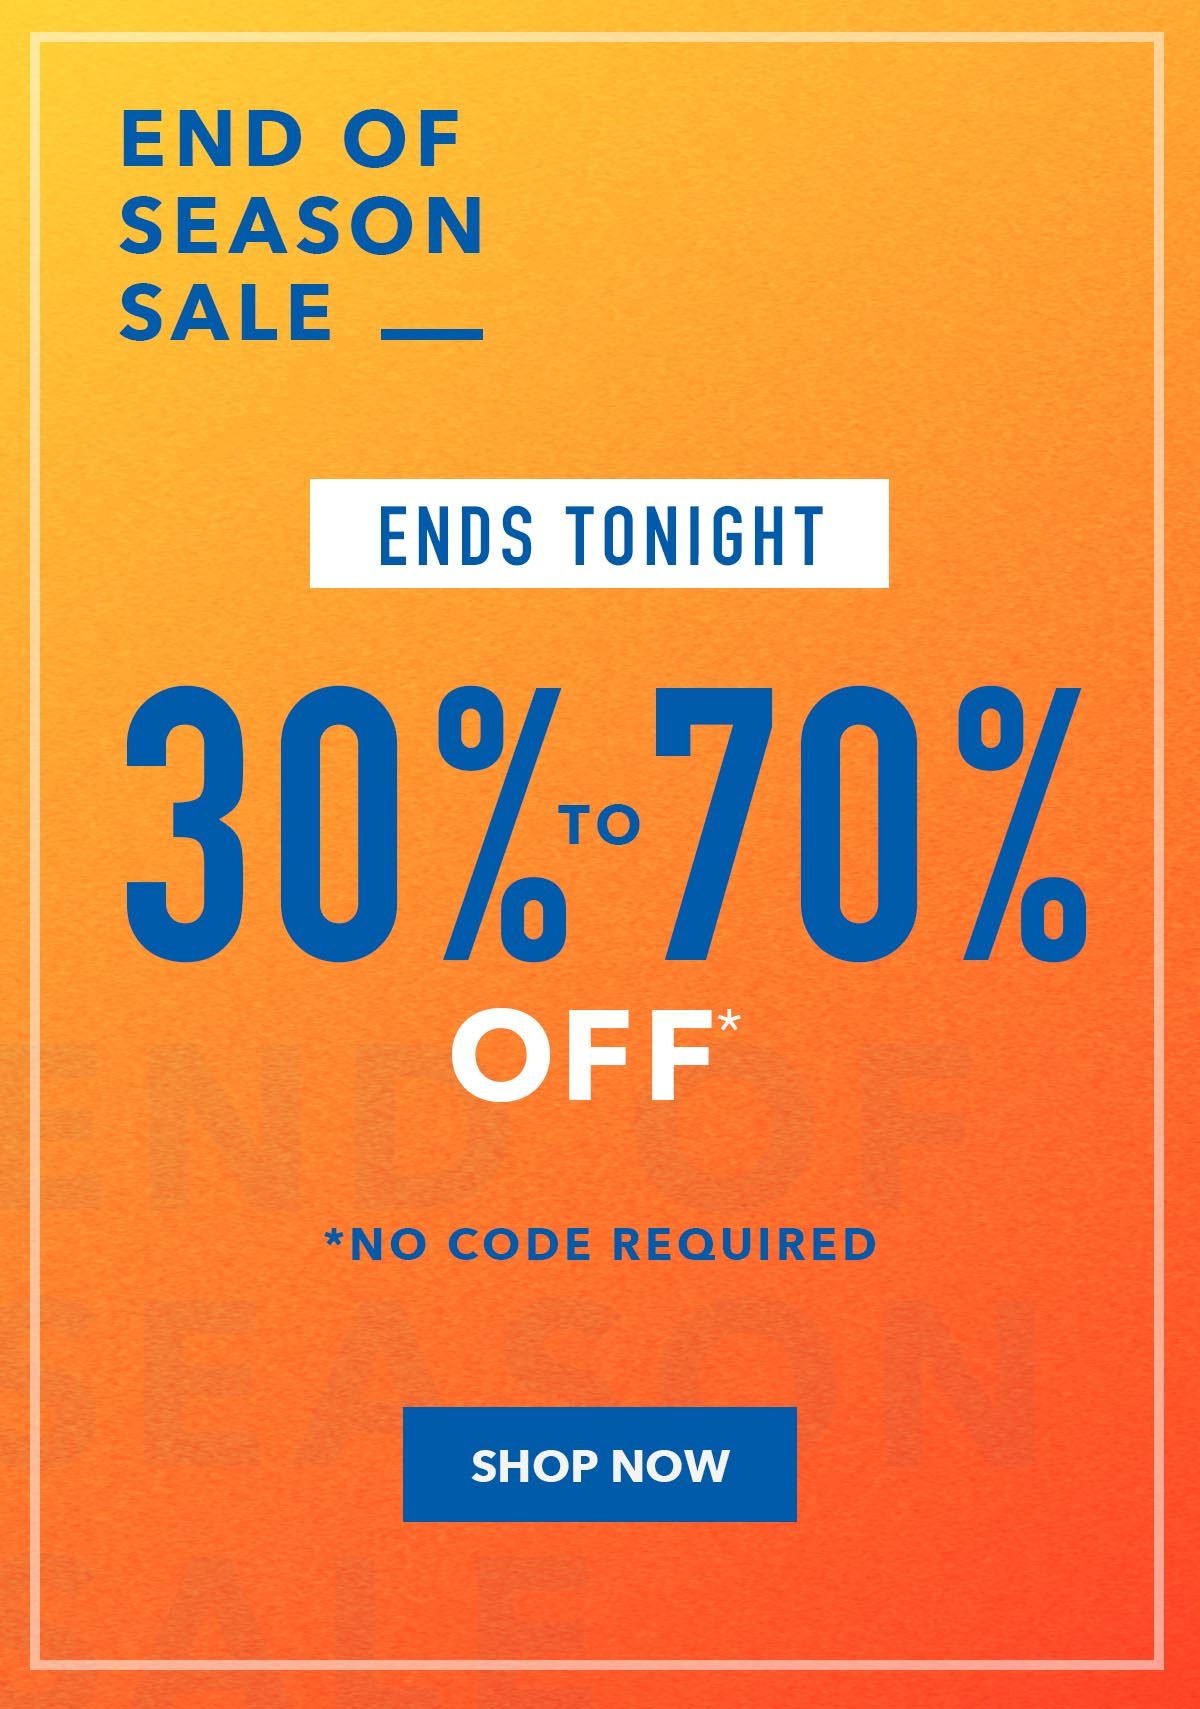 End of Season Sale - Ends Tonight - No Code Required